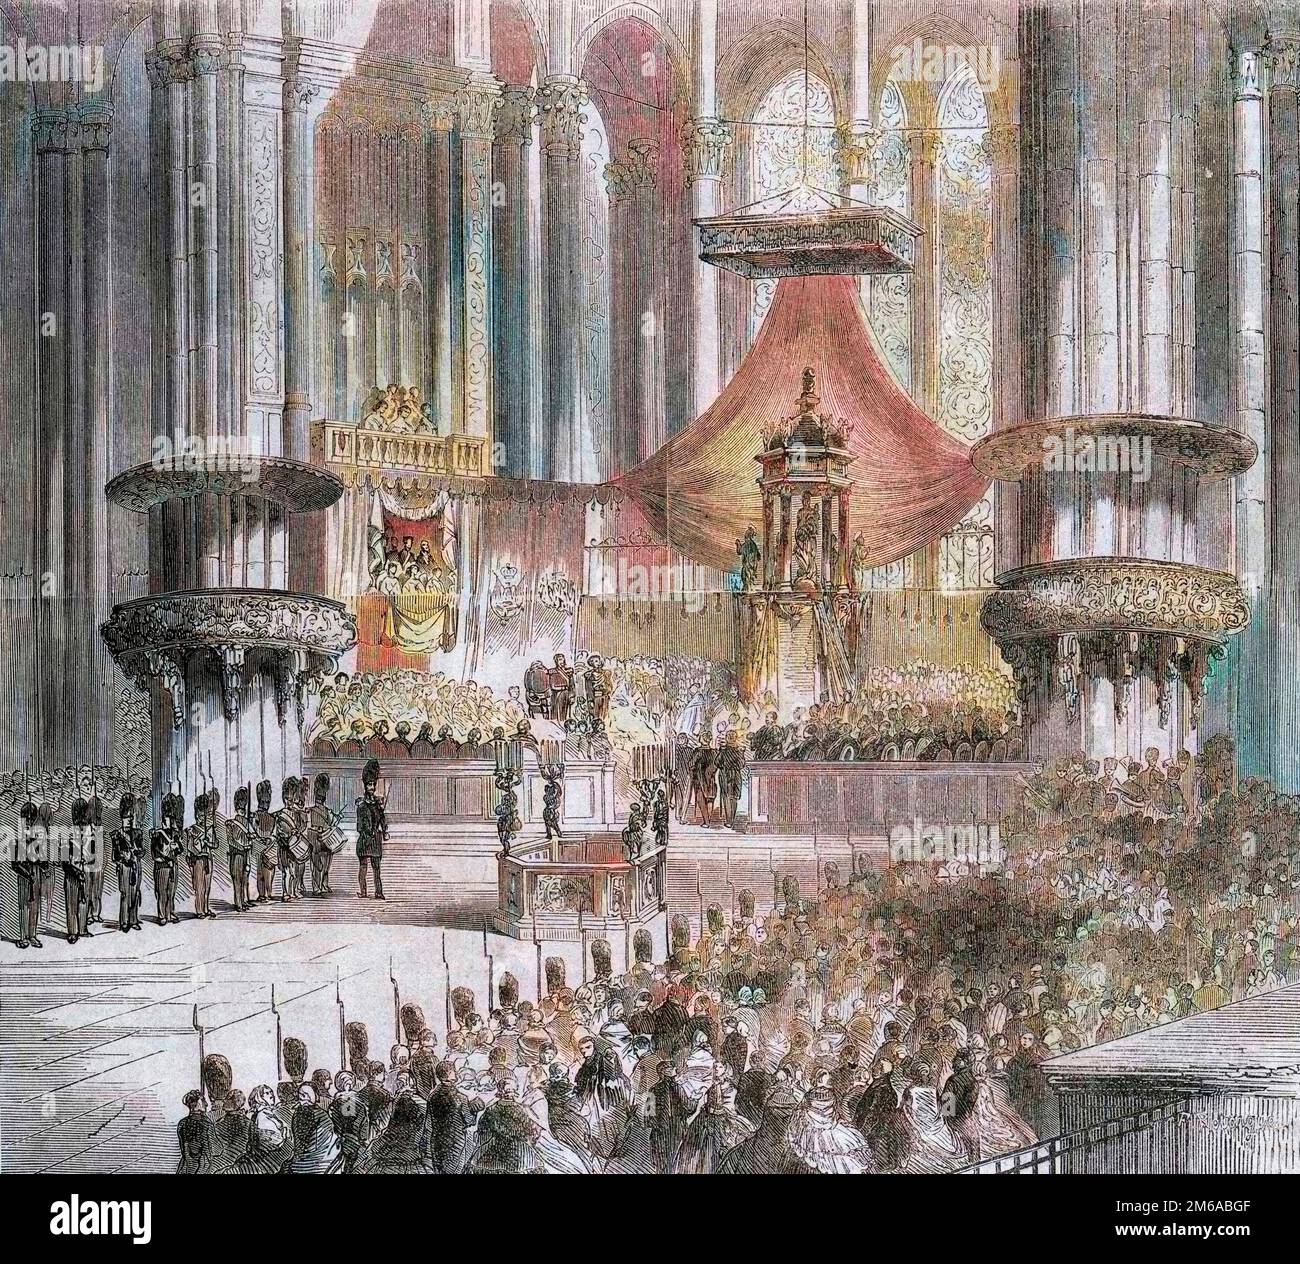 Risorgimento - Celebration of Te Deum in Milan Cathedral at presence of kings of Italy and France, 1859 - Napoleon III (1808-73) and Victor Emmanuel II (1820-78) - Stock Photo